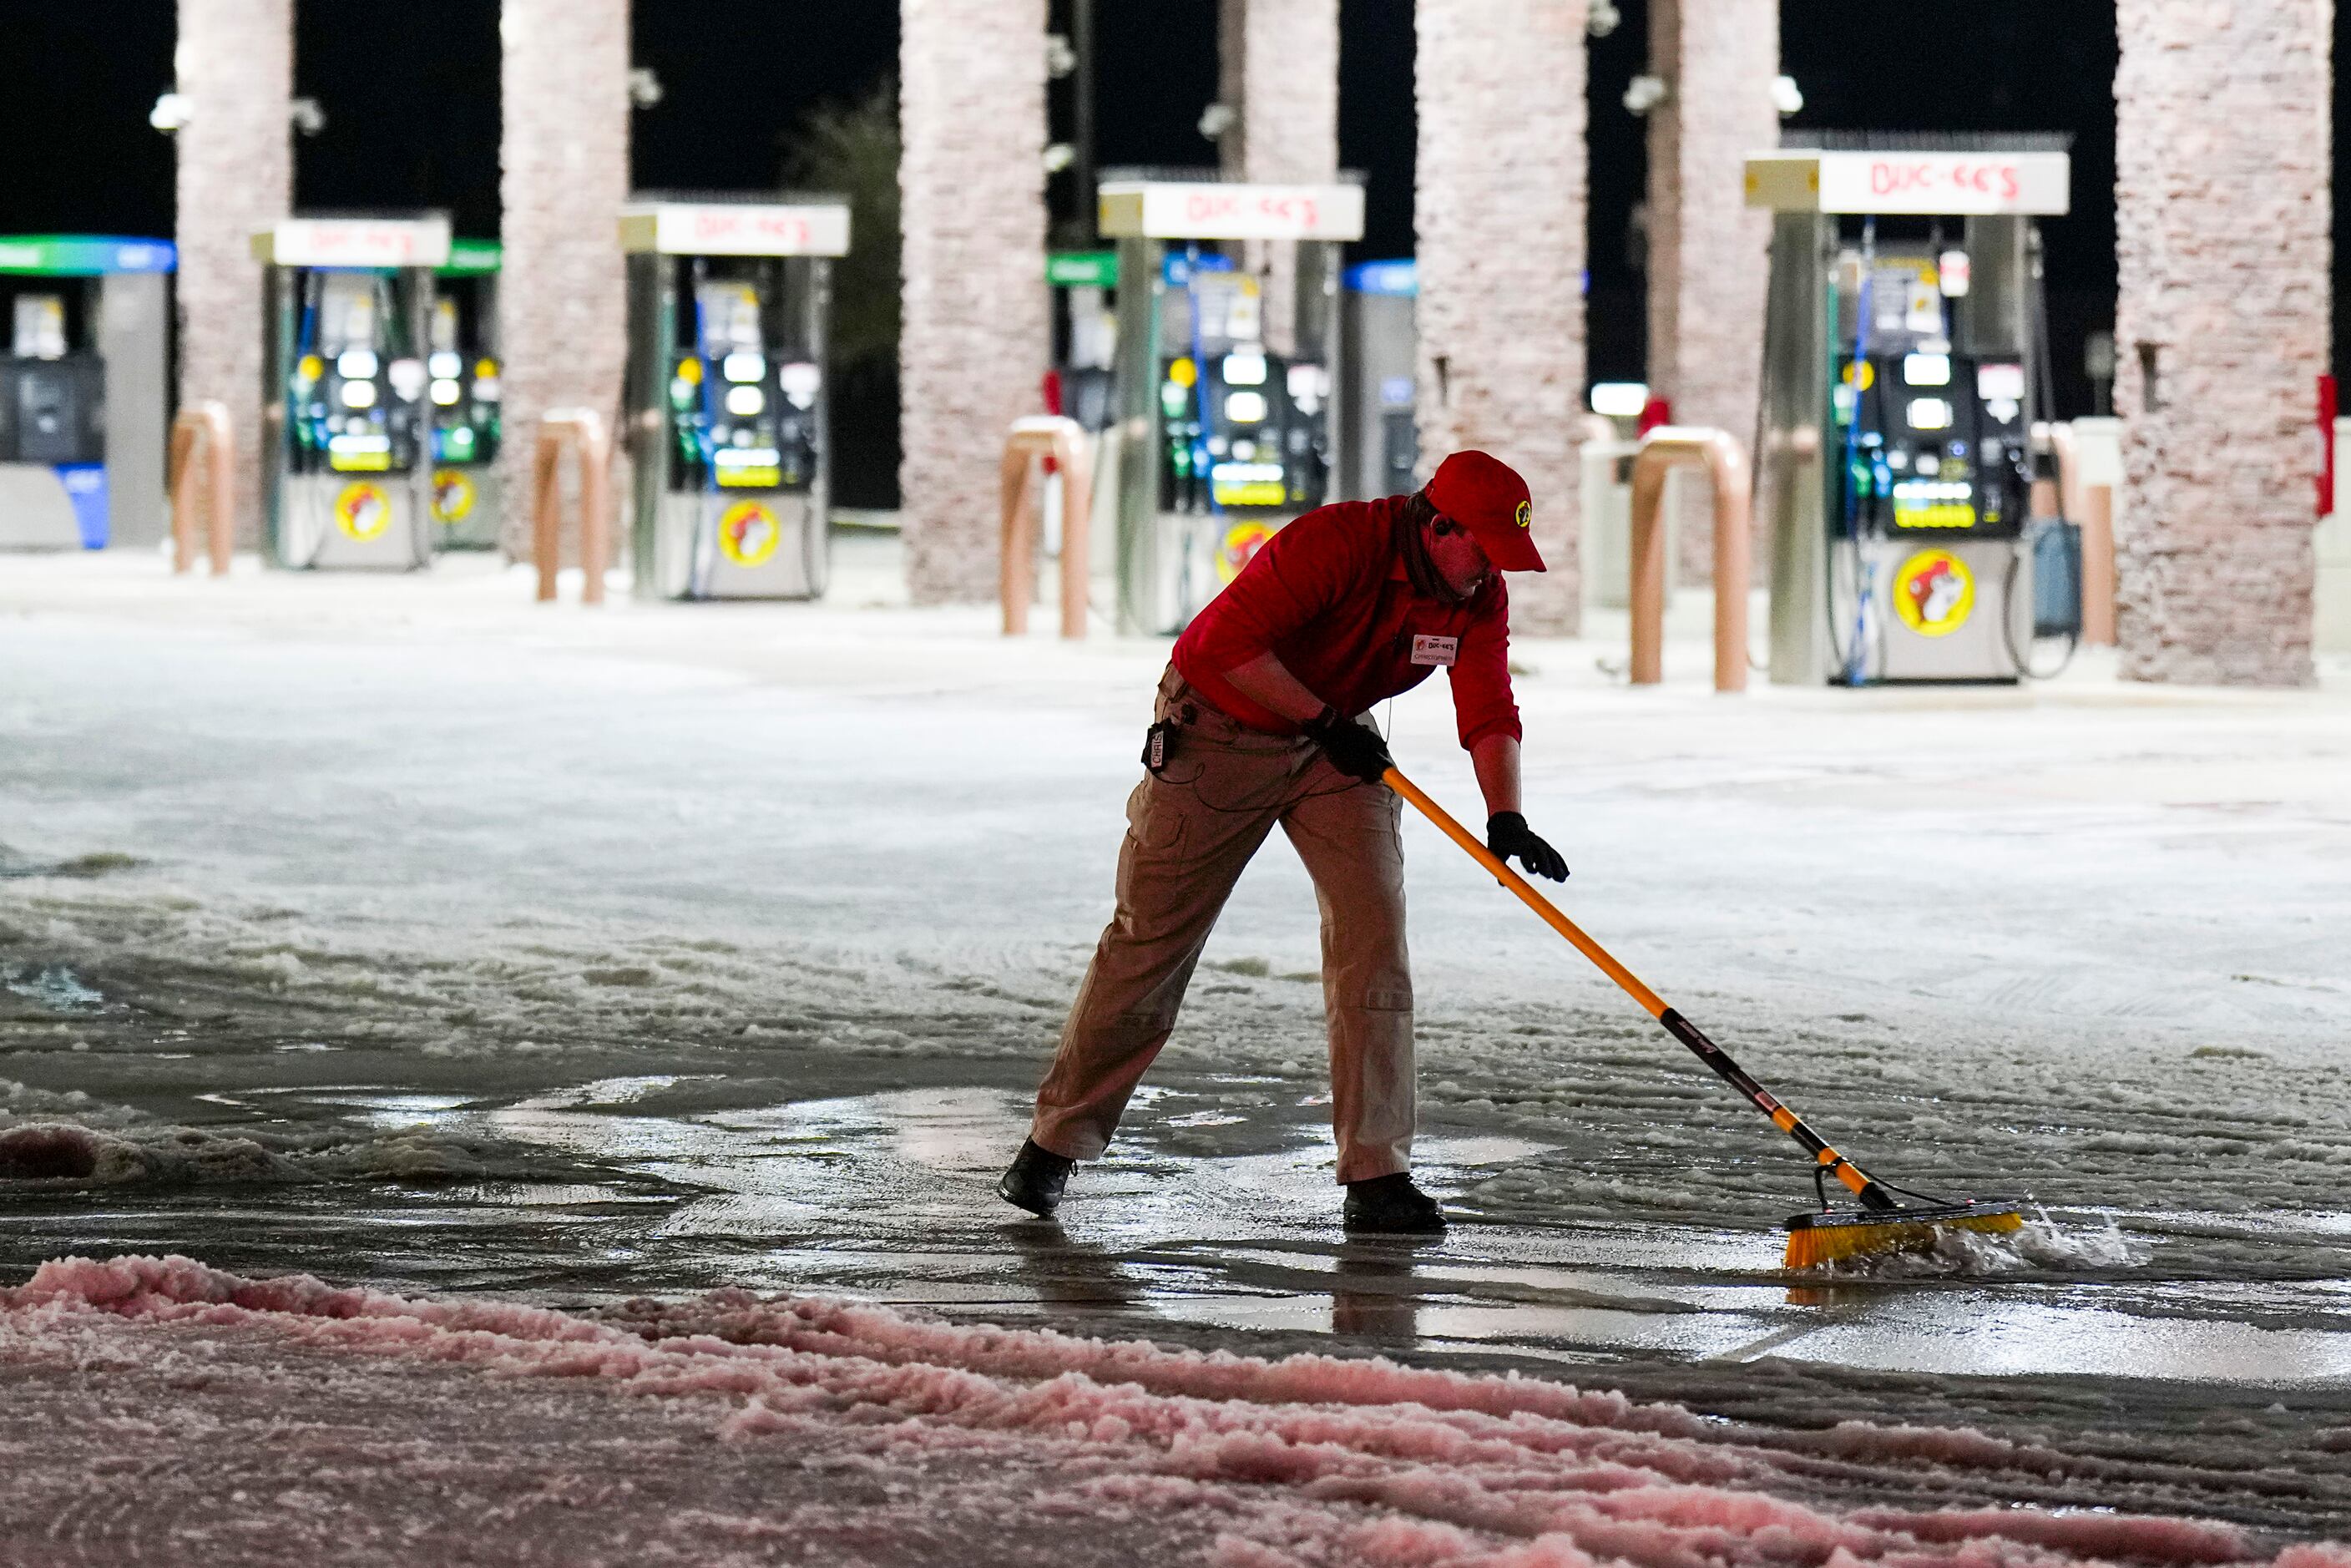 Employee Christopher Scroggins clears snow and ice from walkways in the parking lot at...